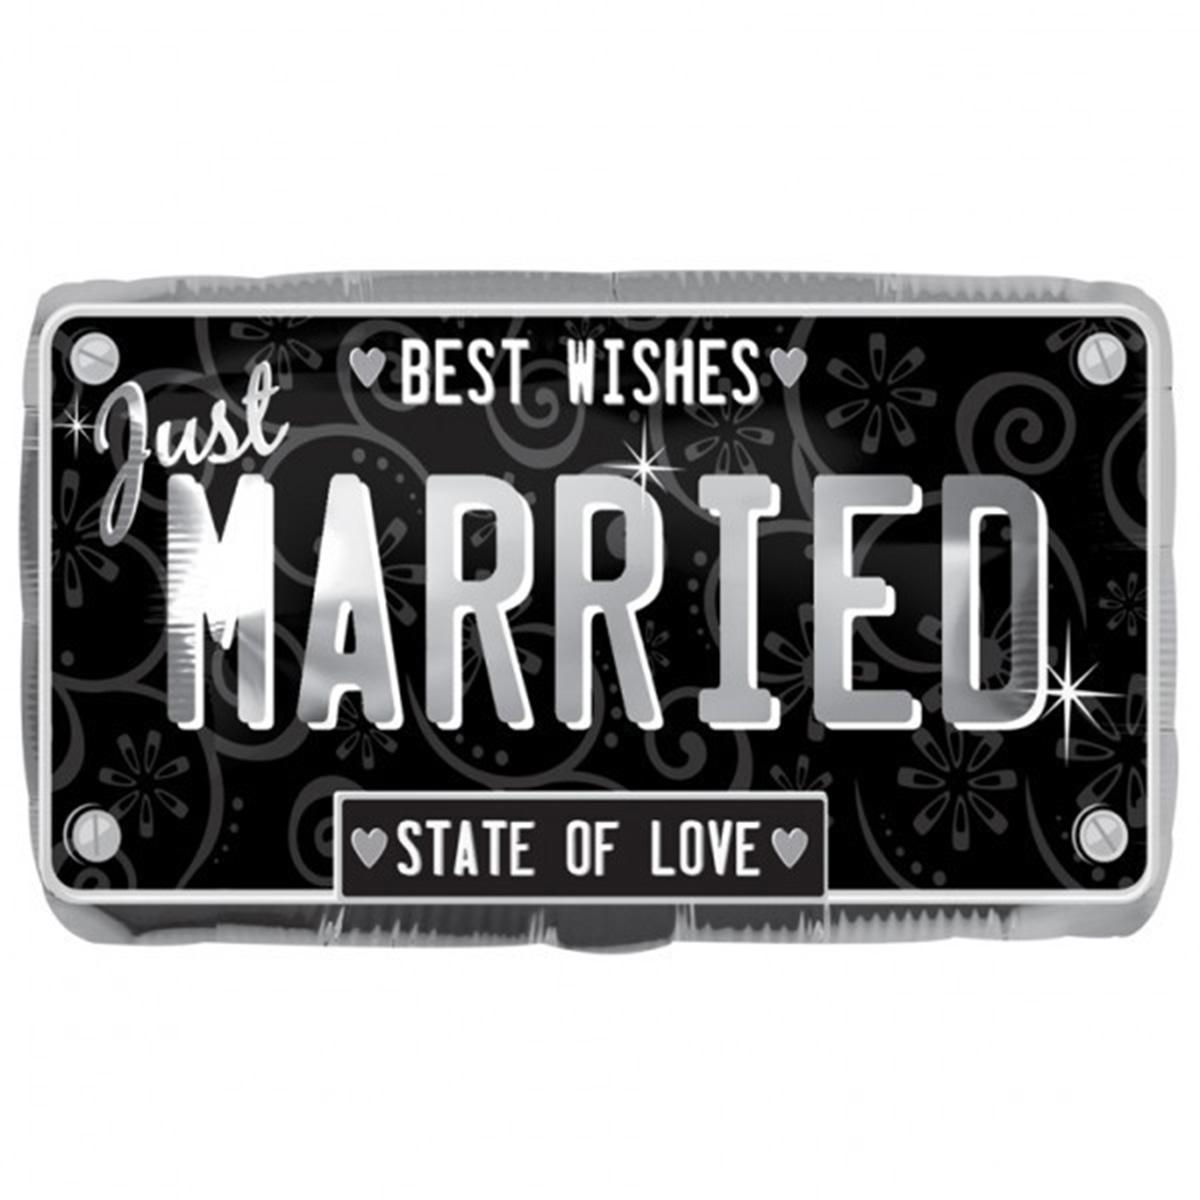 Just Married License Plate Foil Balloon 22 x 13in Balloons & Streamers - Party Centre